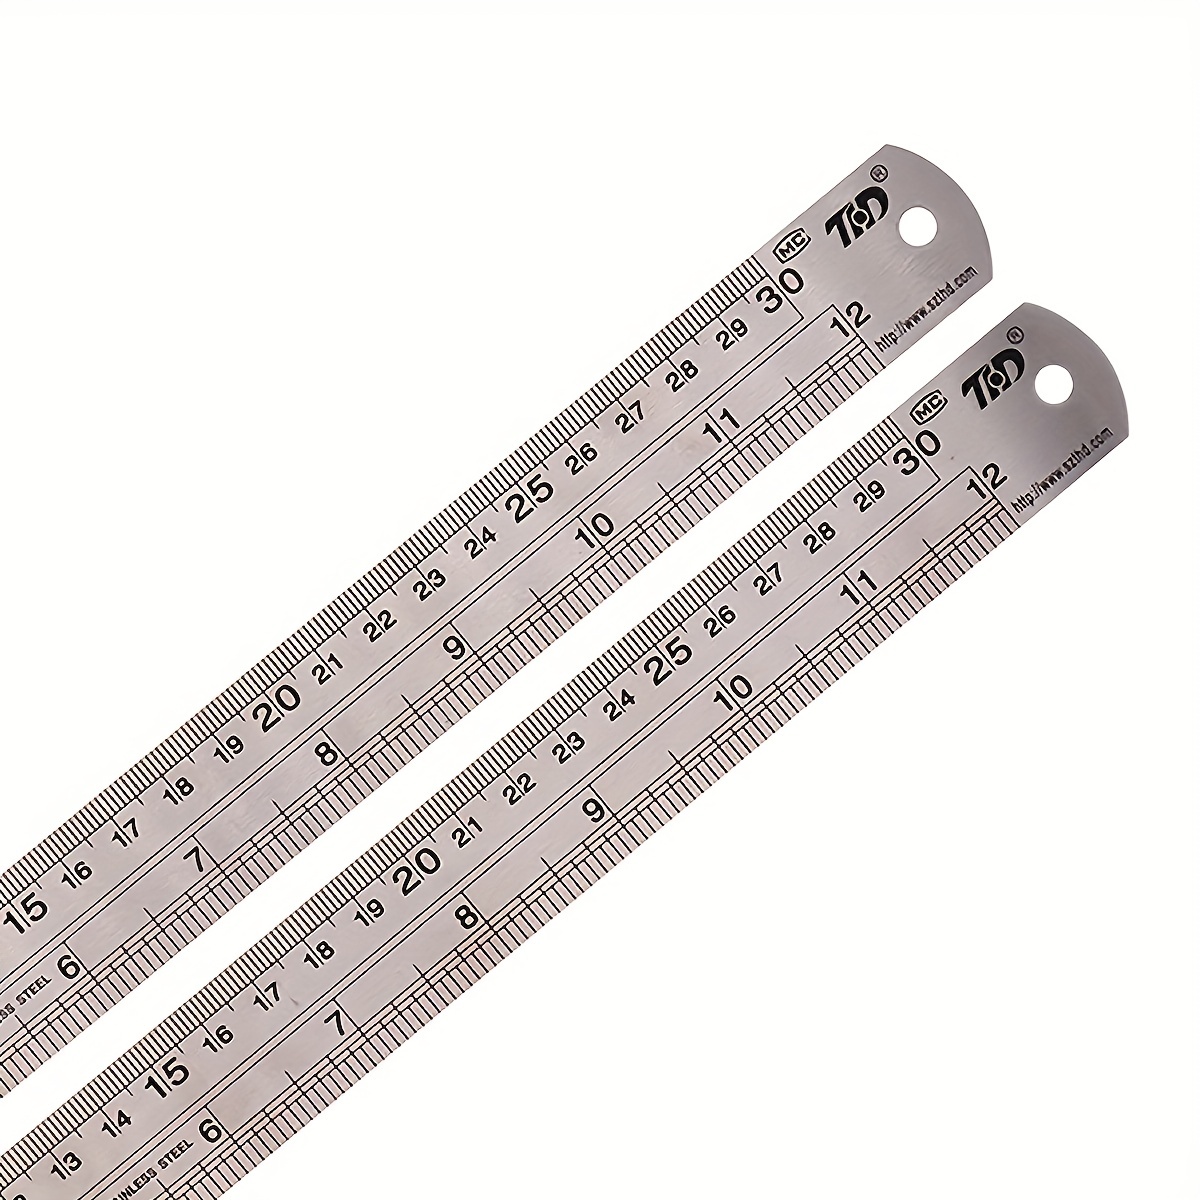 Metric 2-Sided Ruler - 30cm Left to Right or 30cm Vertical